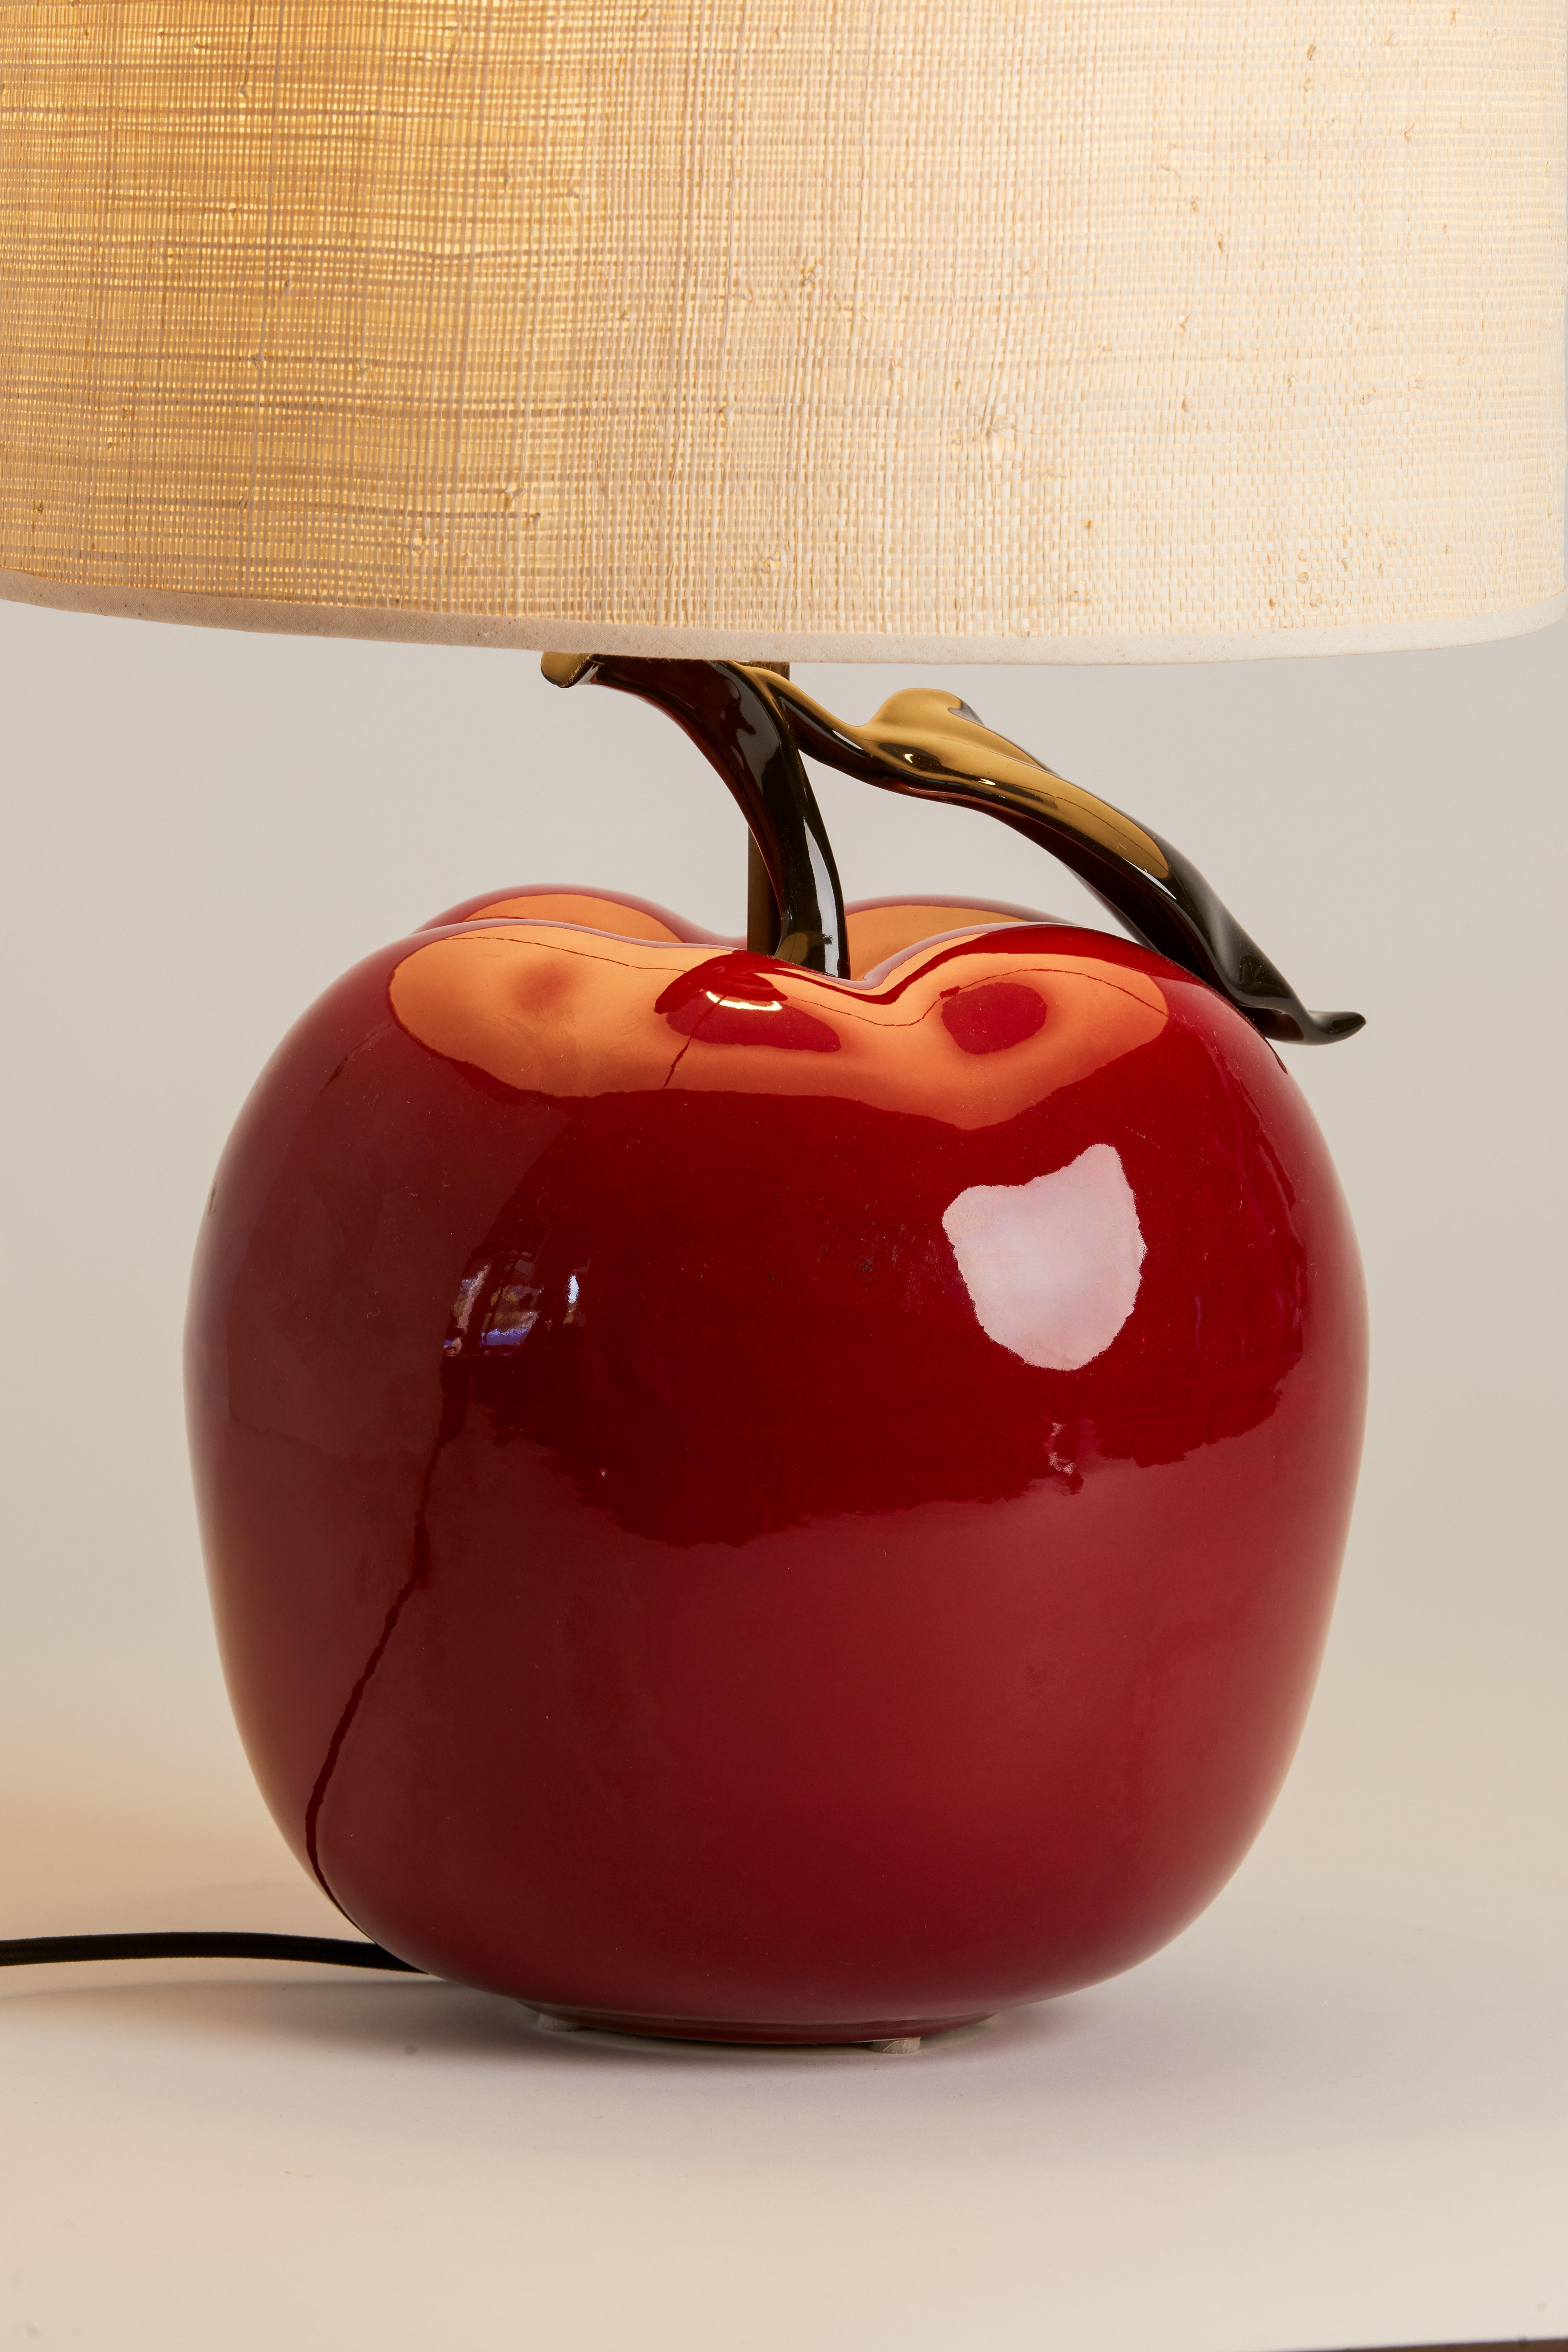 Very Unique and fun piece
1960s Italian Blown Glass Apple Lamp with Custom Shade.